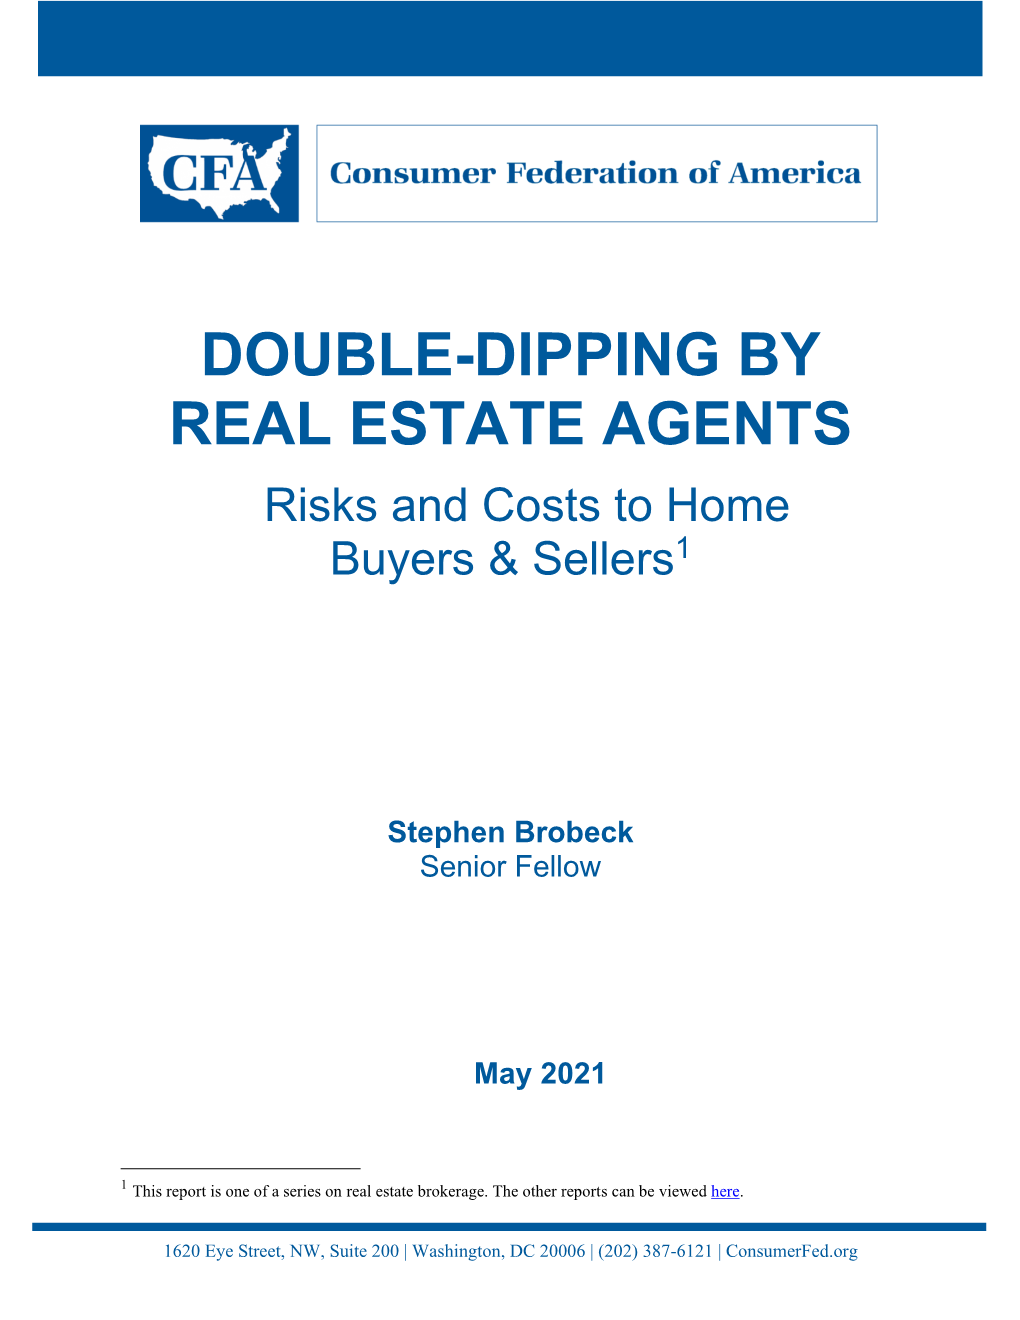 DOUBLE-DIPPING by REAL ESTATE AGENTS Risks and Costs to Home Buyers & Sellers1